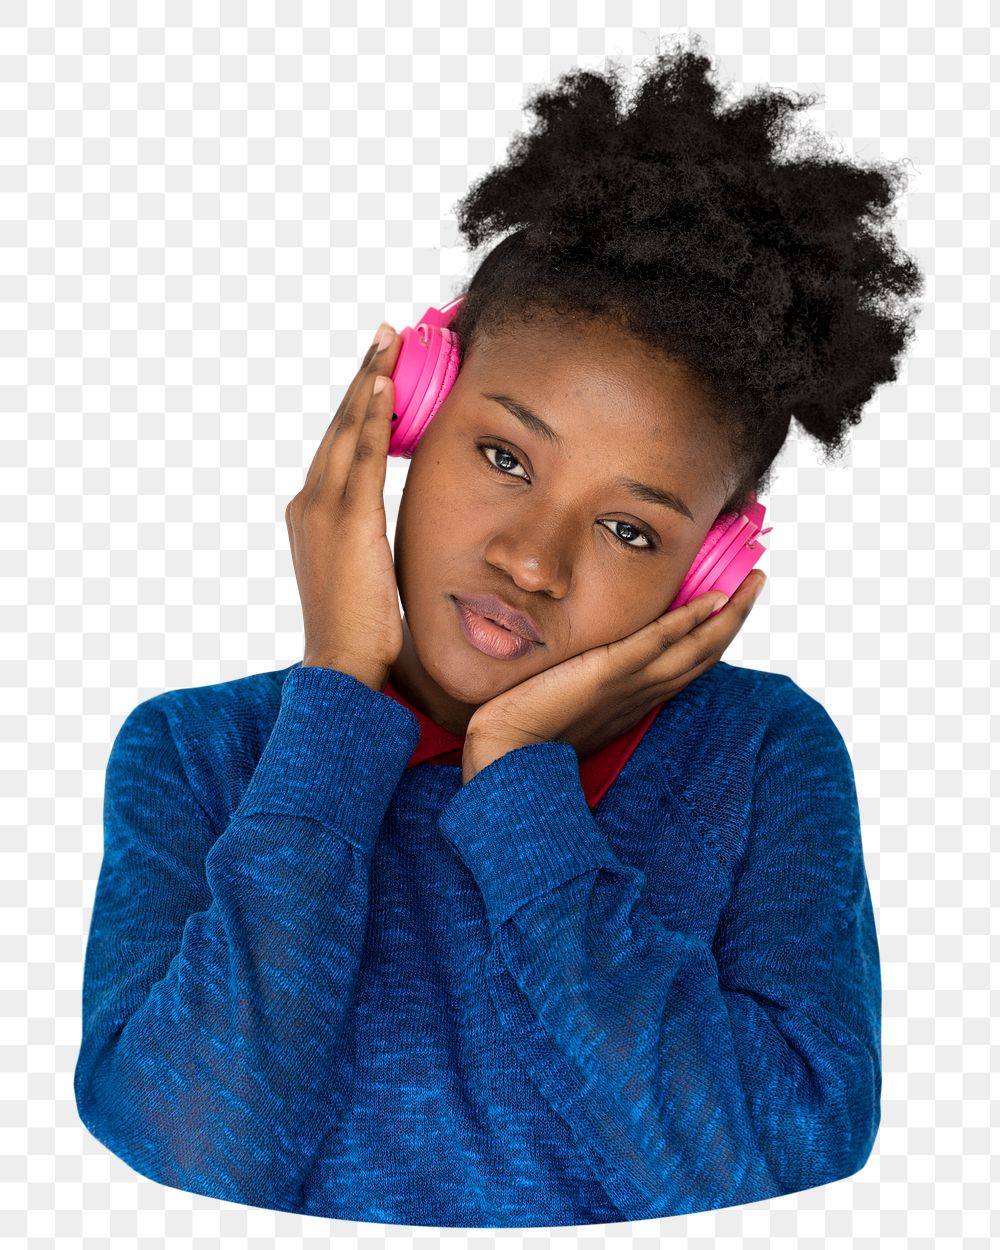 Young African girl png element, transparent background